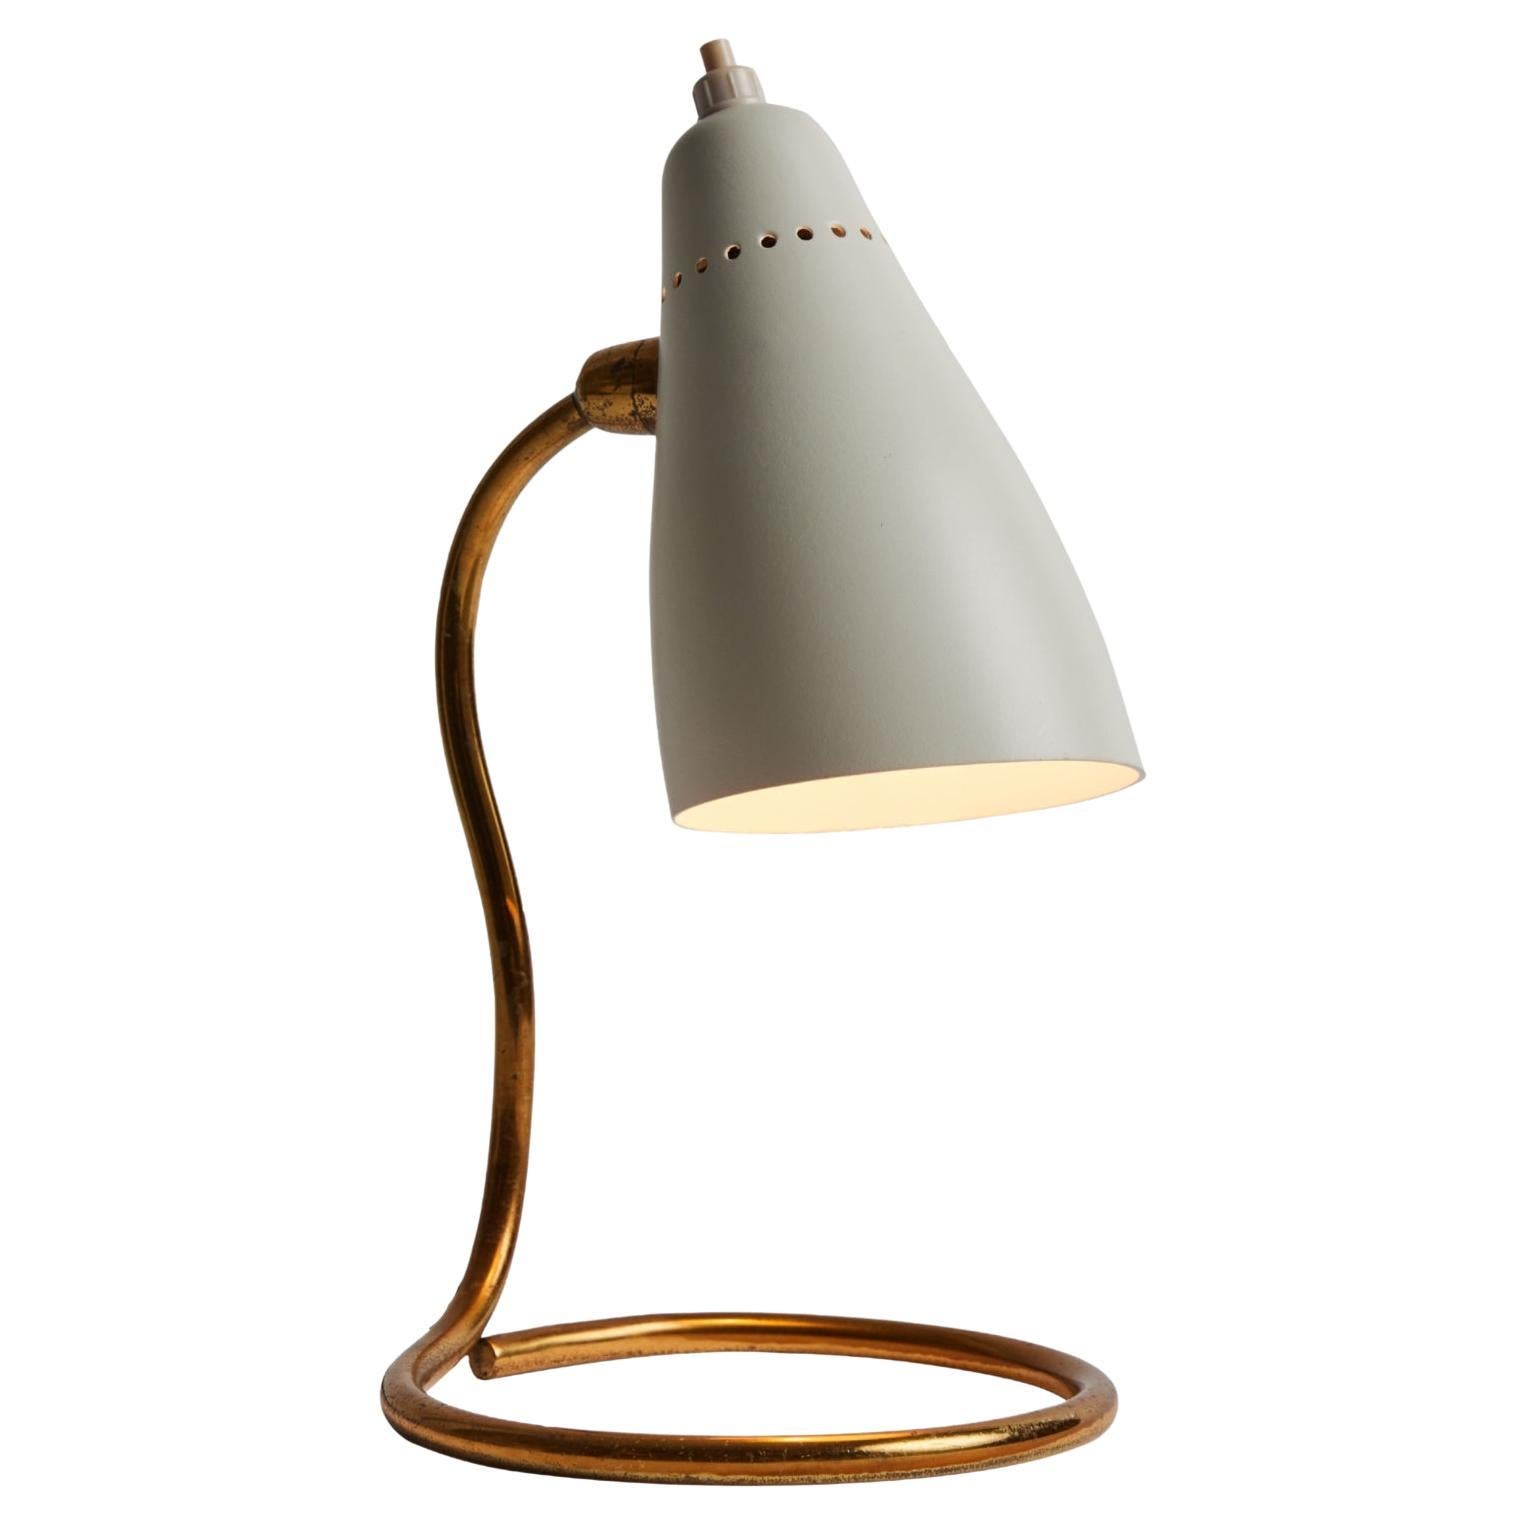 1950s Giuseppe Ostuni 'Vipere' table lamp for O-Luce. An extremely rare and surprisingly utilitarian table lamp executed in white painted aluminum and brass by one of the most refined Italian designers of the midcentury. A highly adaptable light,